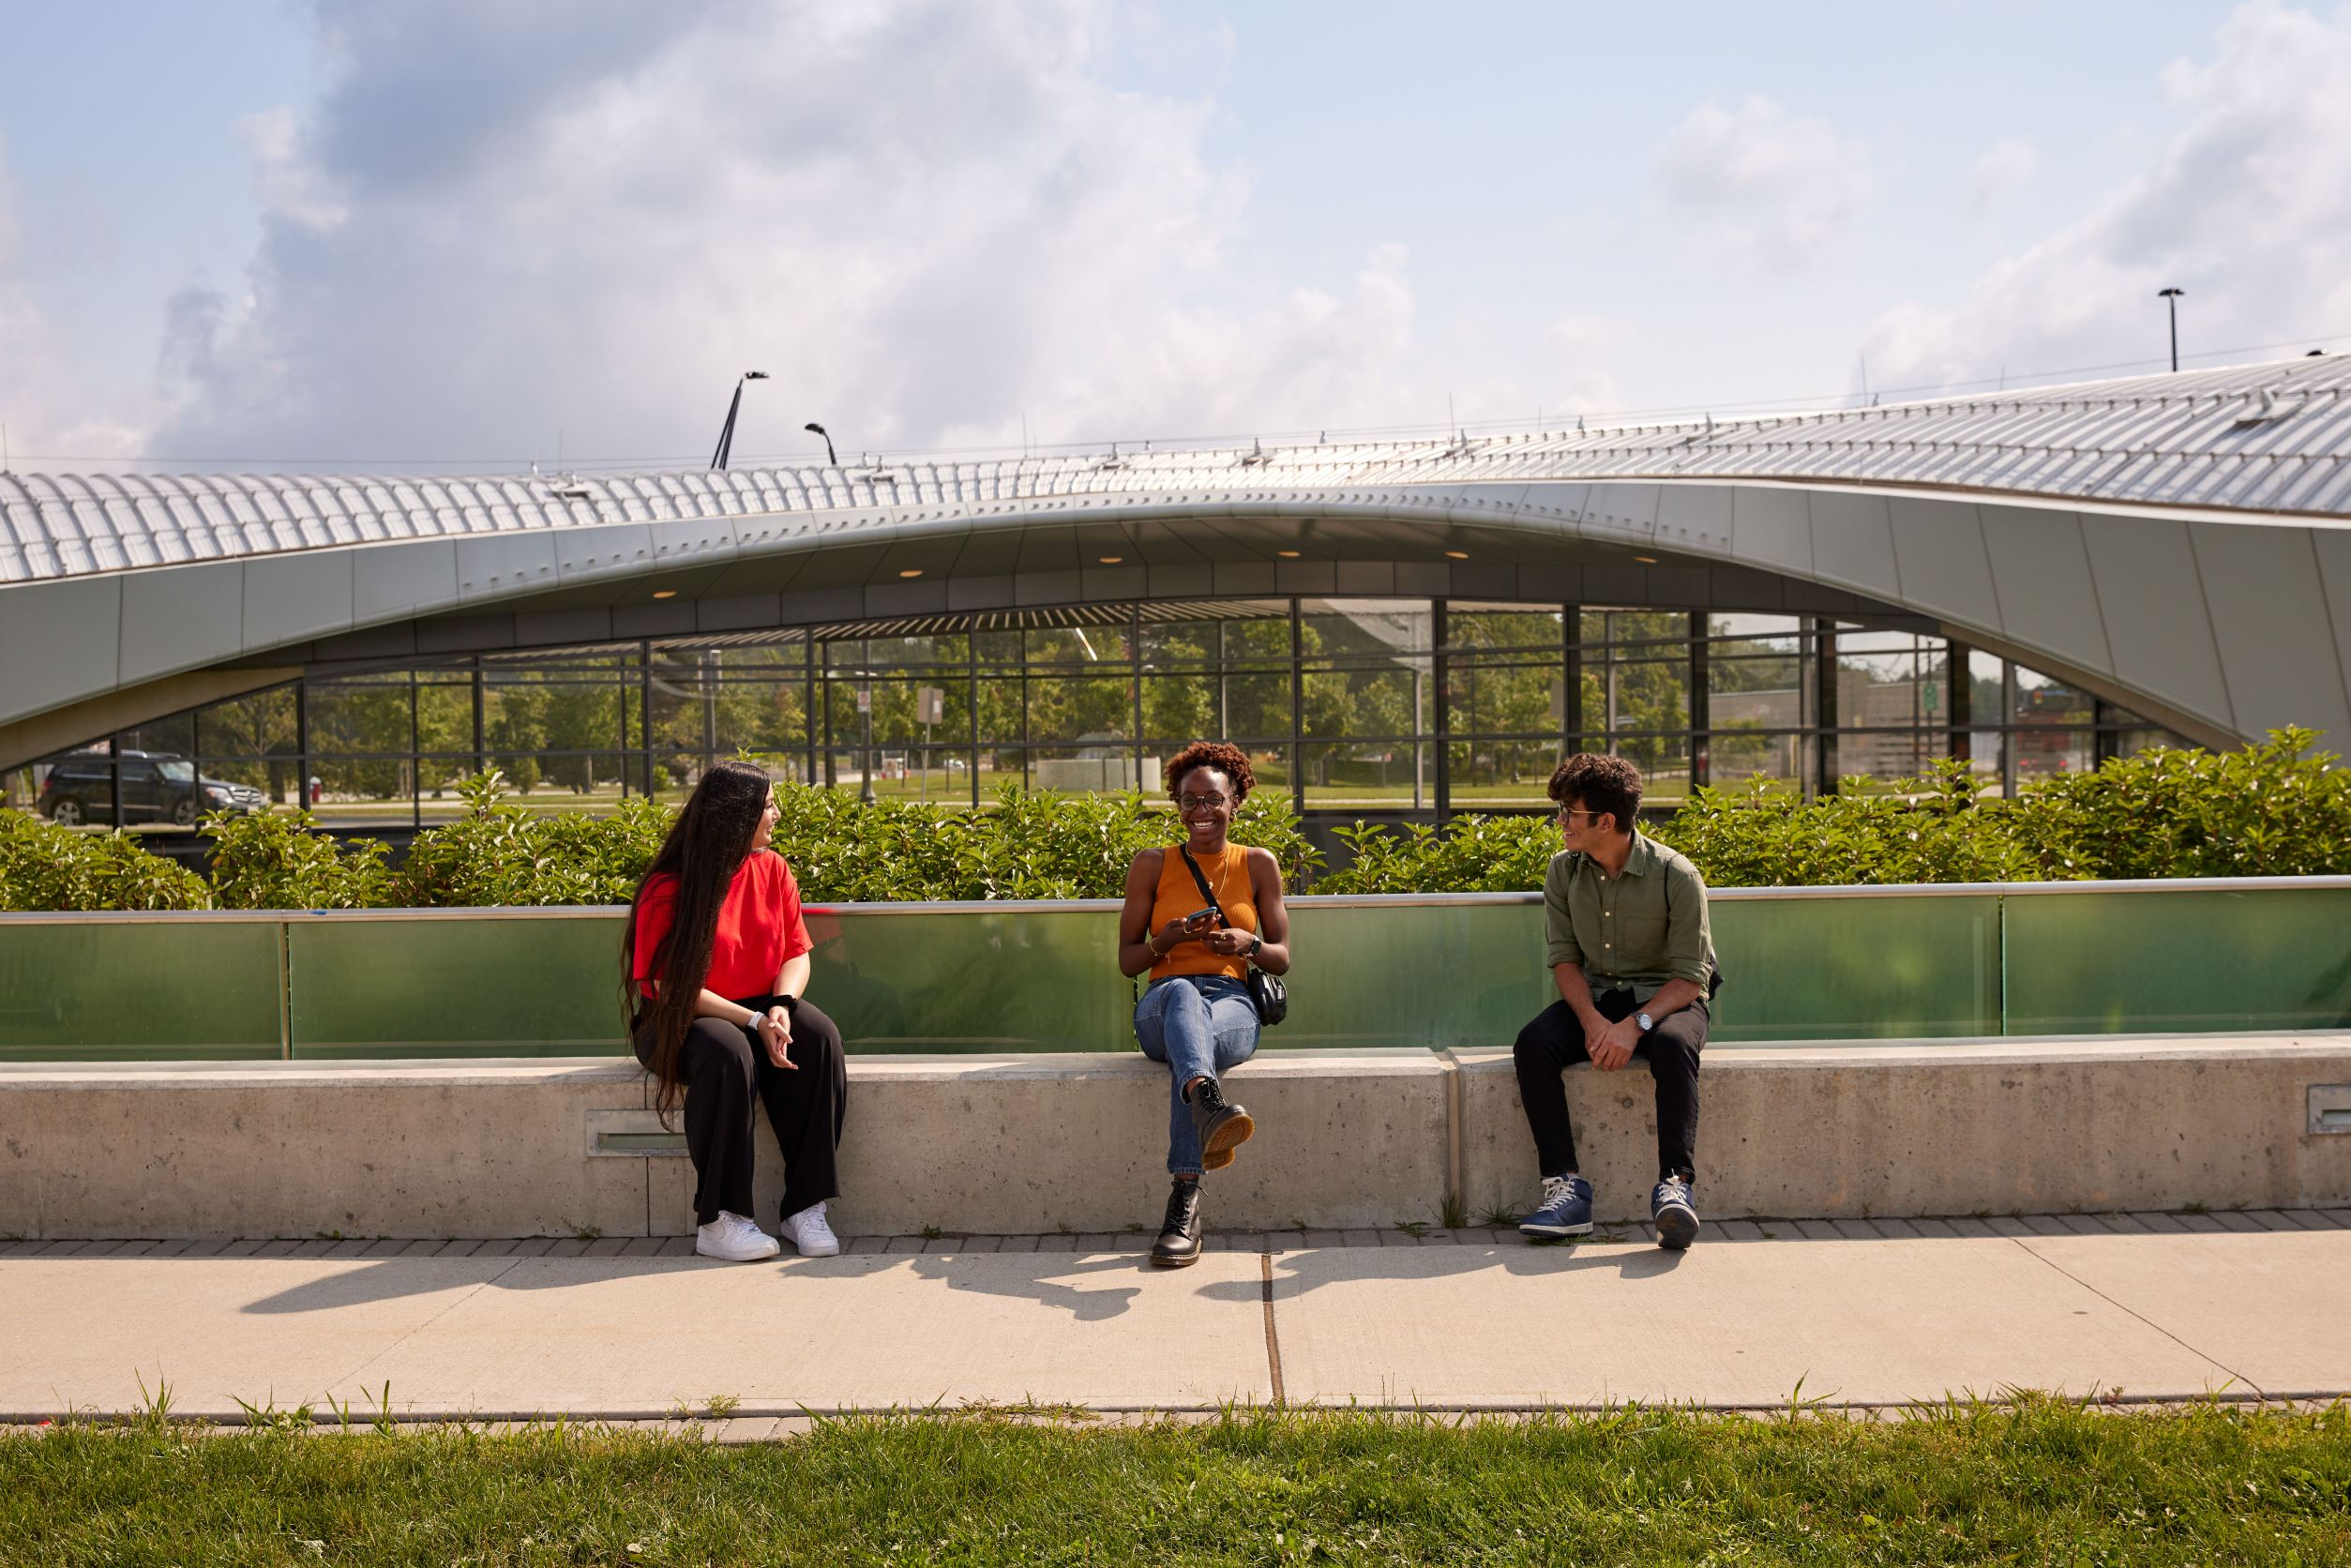 Three students sit smiling and talking in front of a glass-paneled subway station.